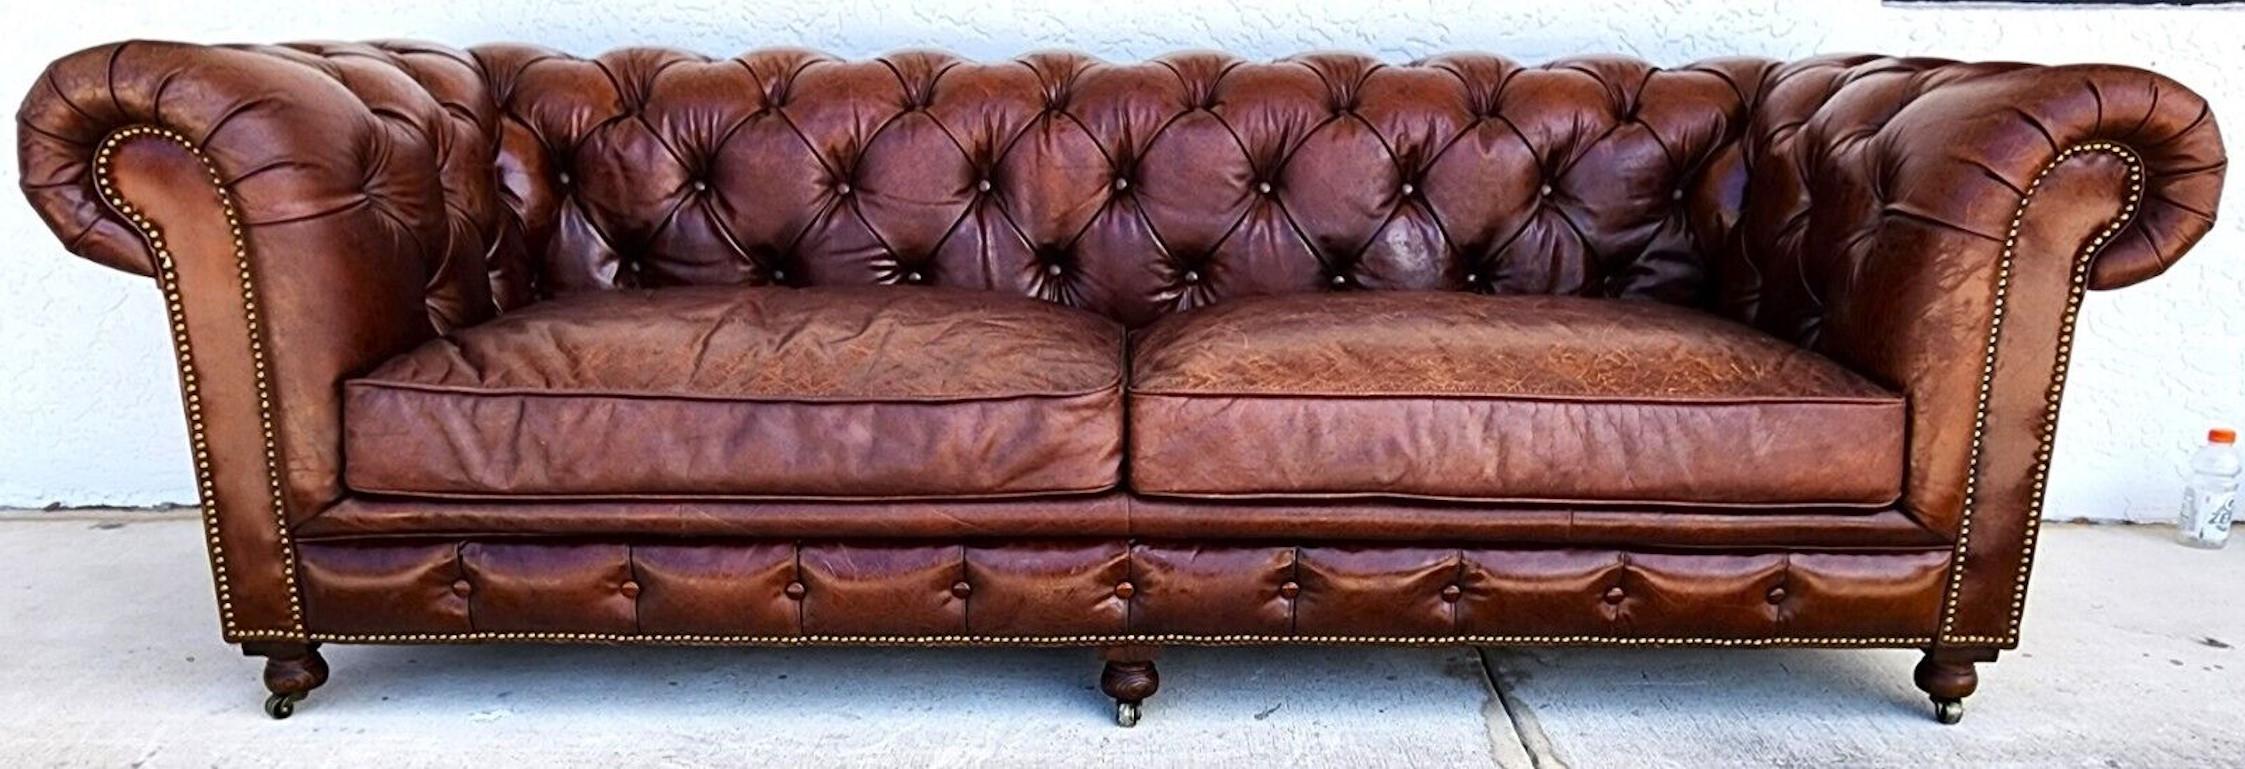 Chesterfield Leather Conrad Sofa by Four Hands  1